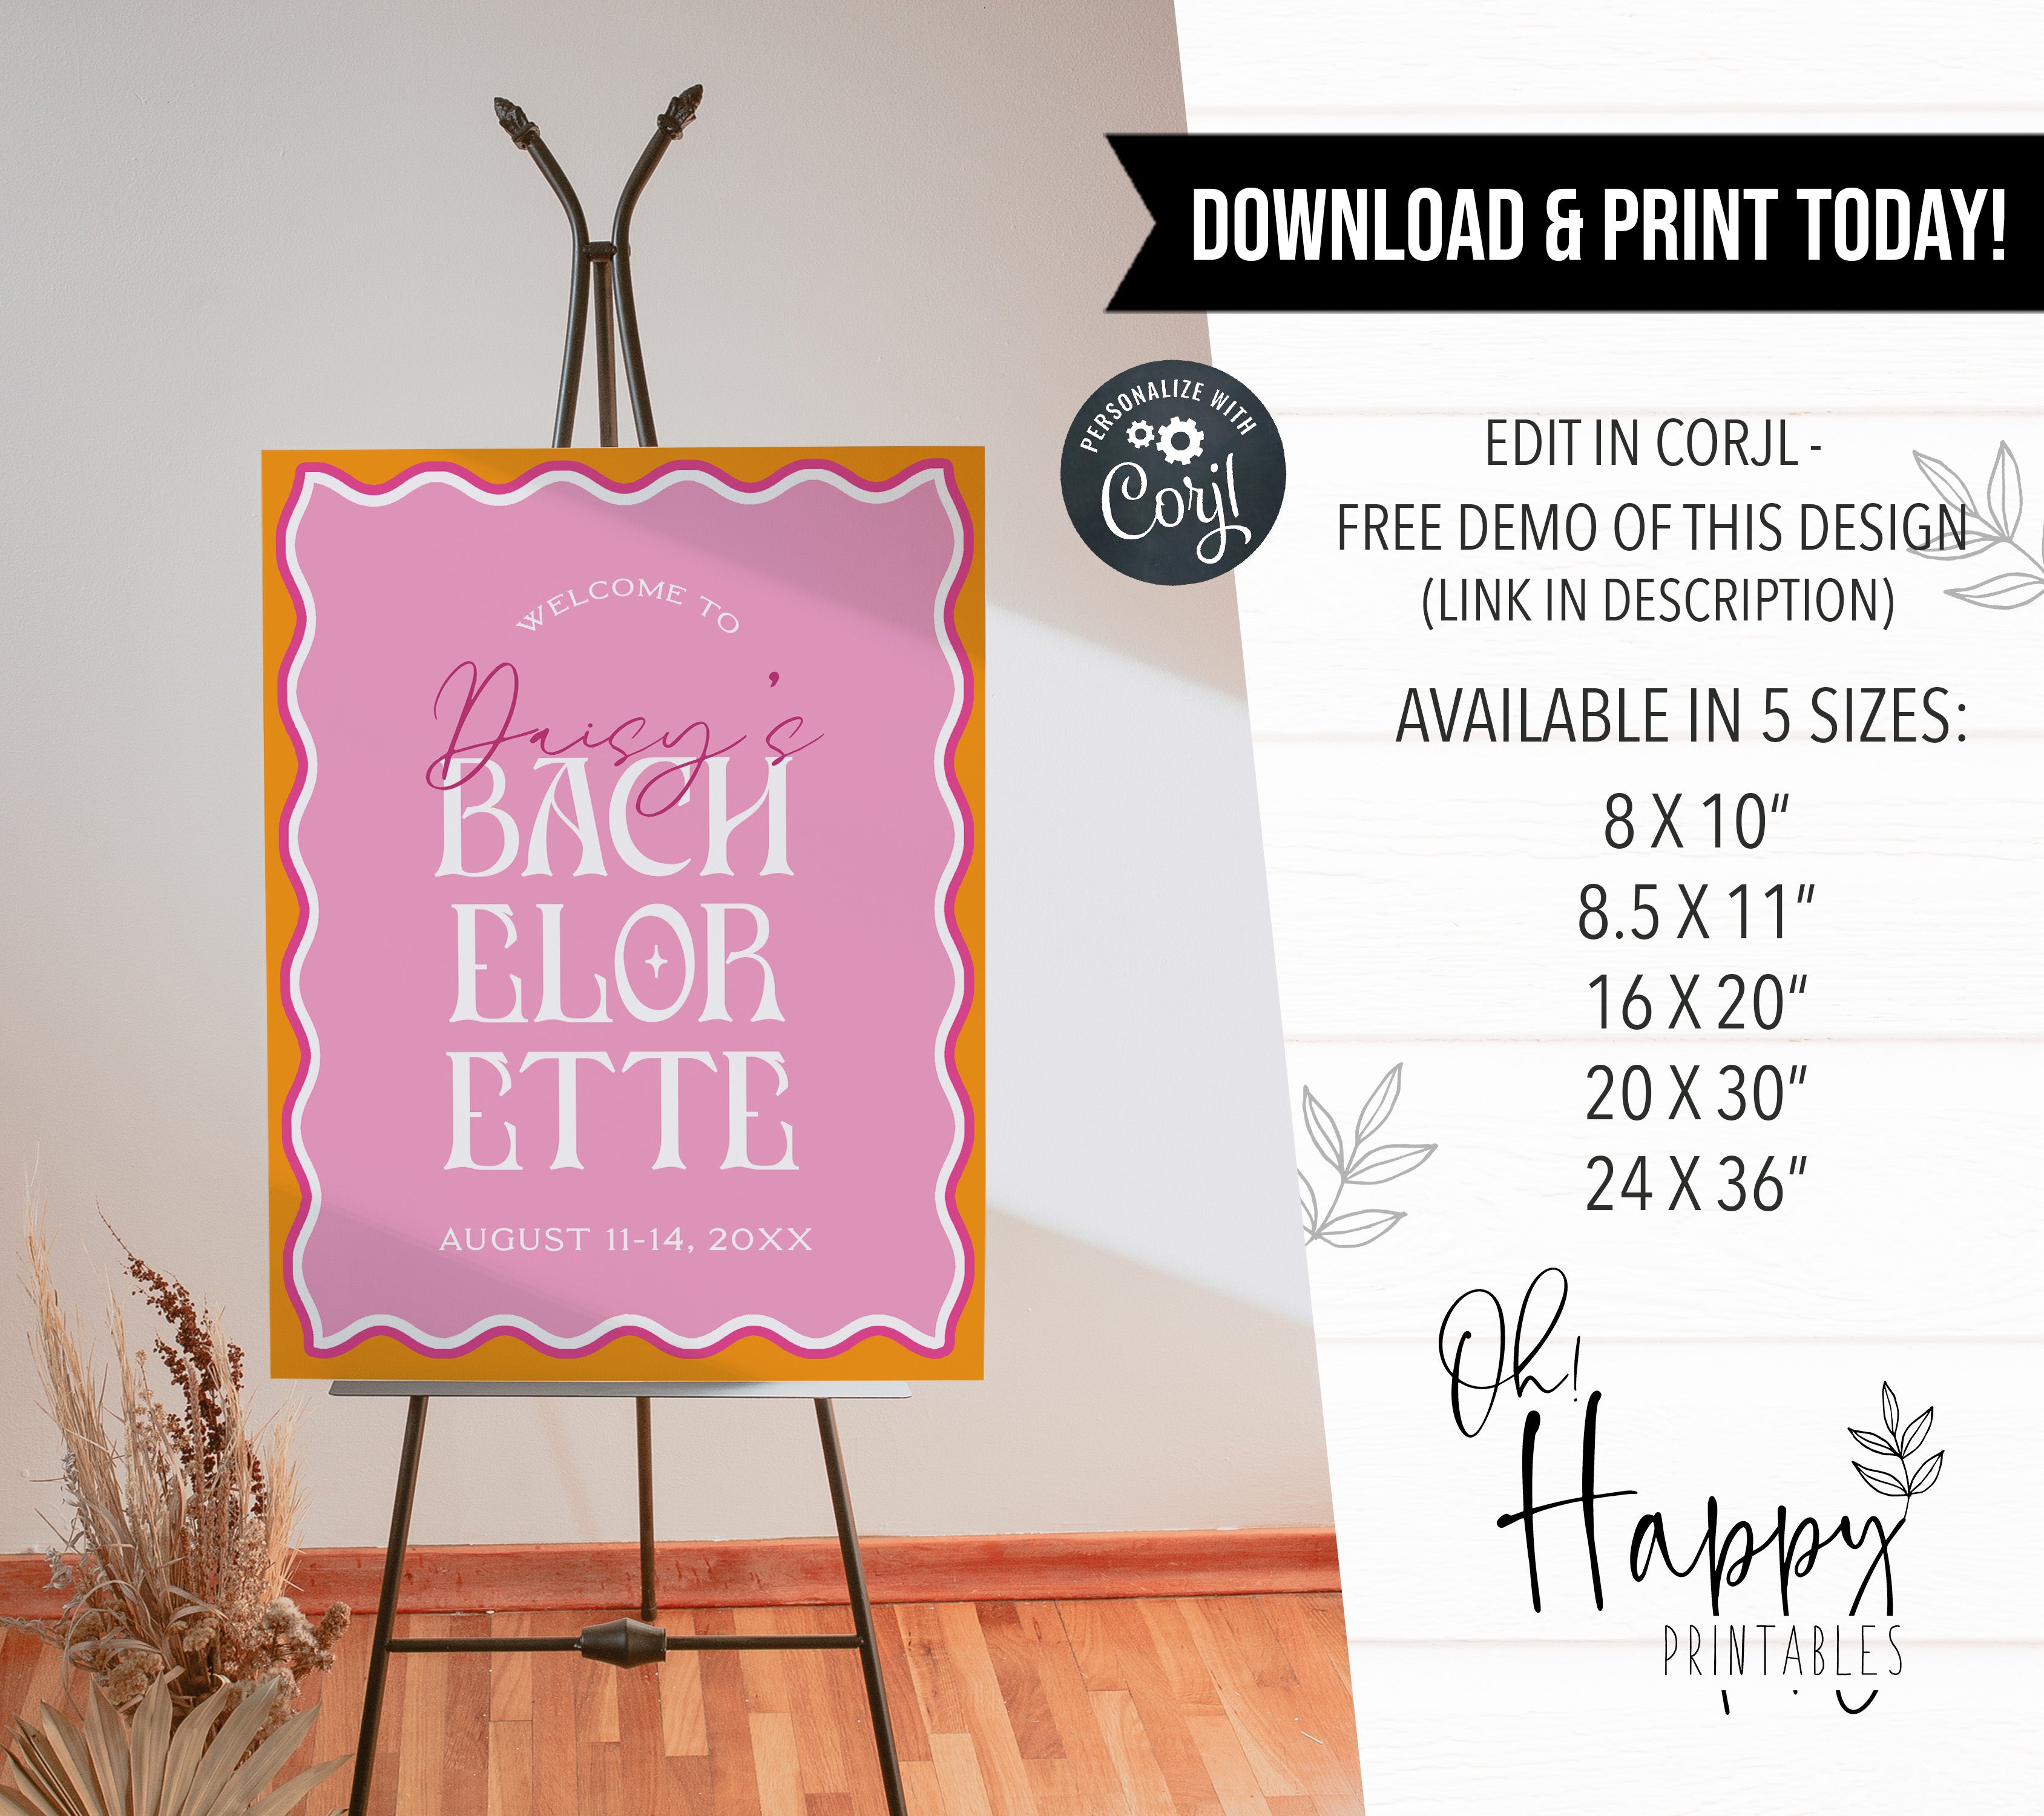 Get everything you need to throw the ultimate bachelorette party with our party bundle! This all-in-one package includes 100 editable games, bachelorette invite, bachelorette weekend itinerary, and welcome signs, all designed with a fresh pink theme.